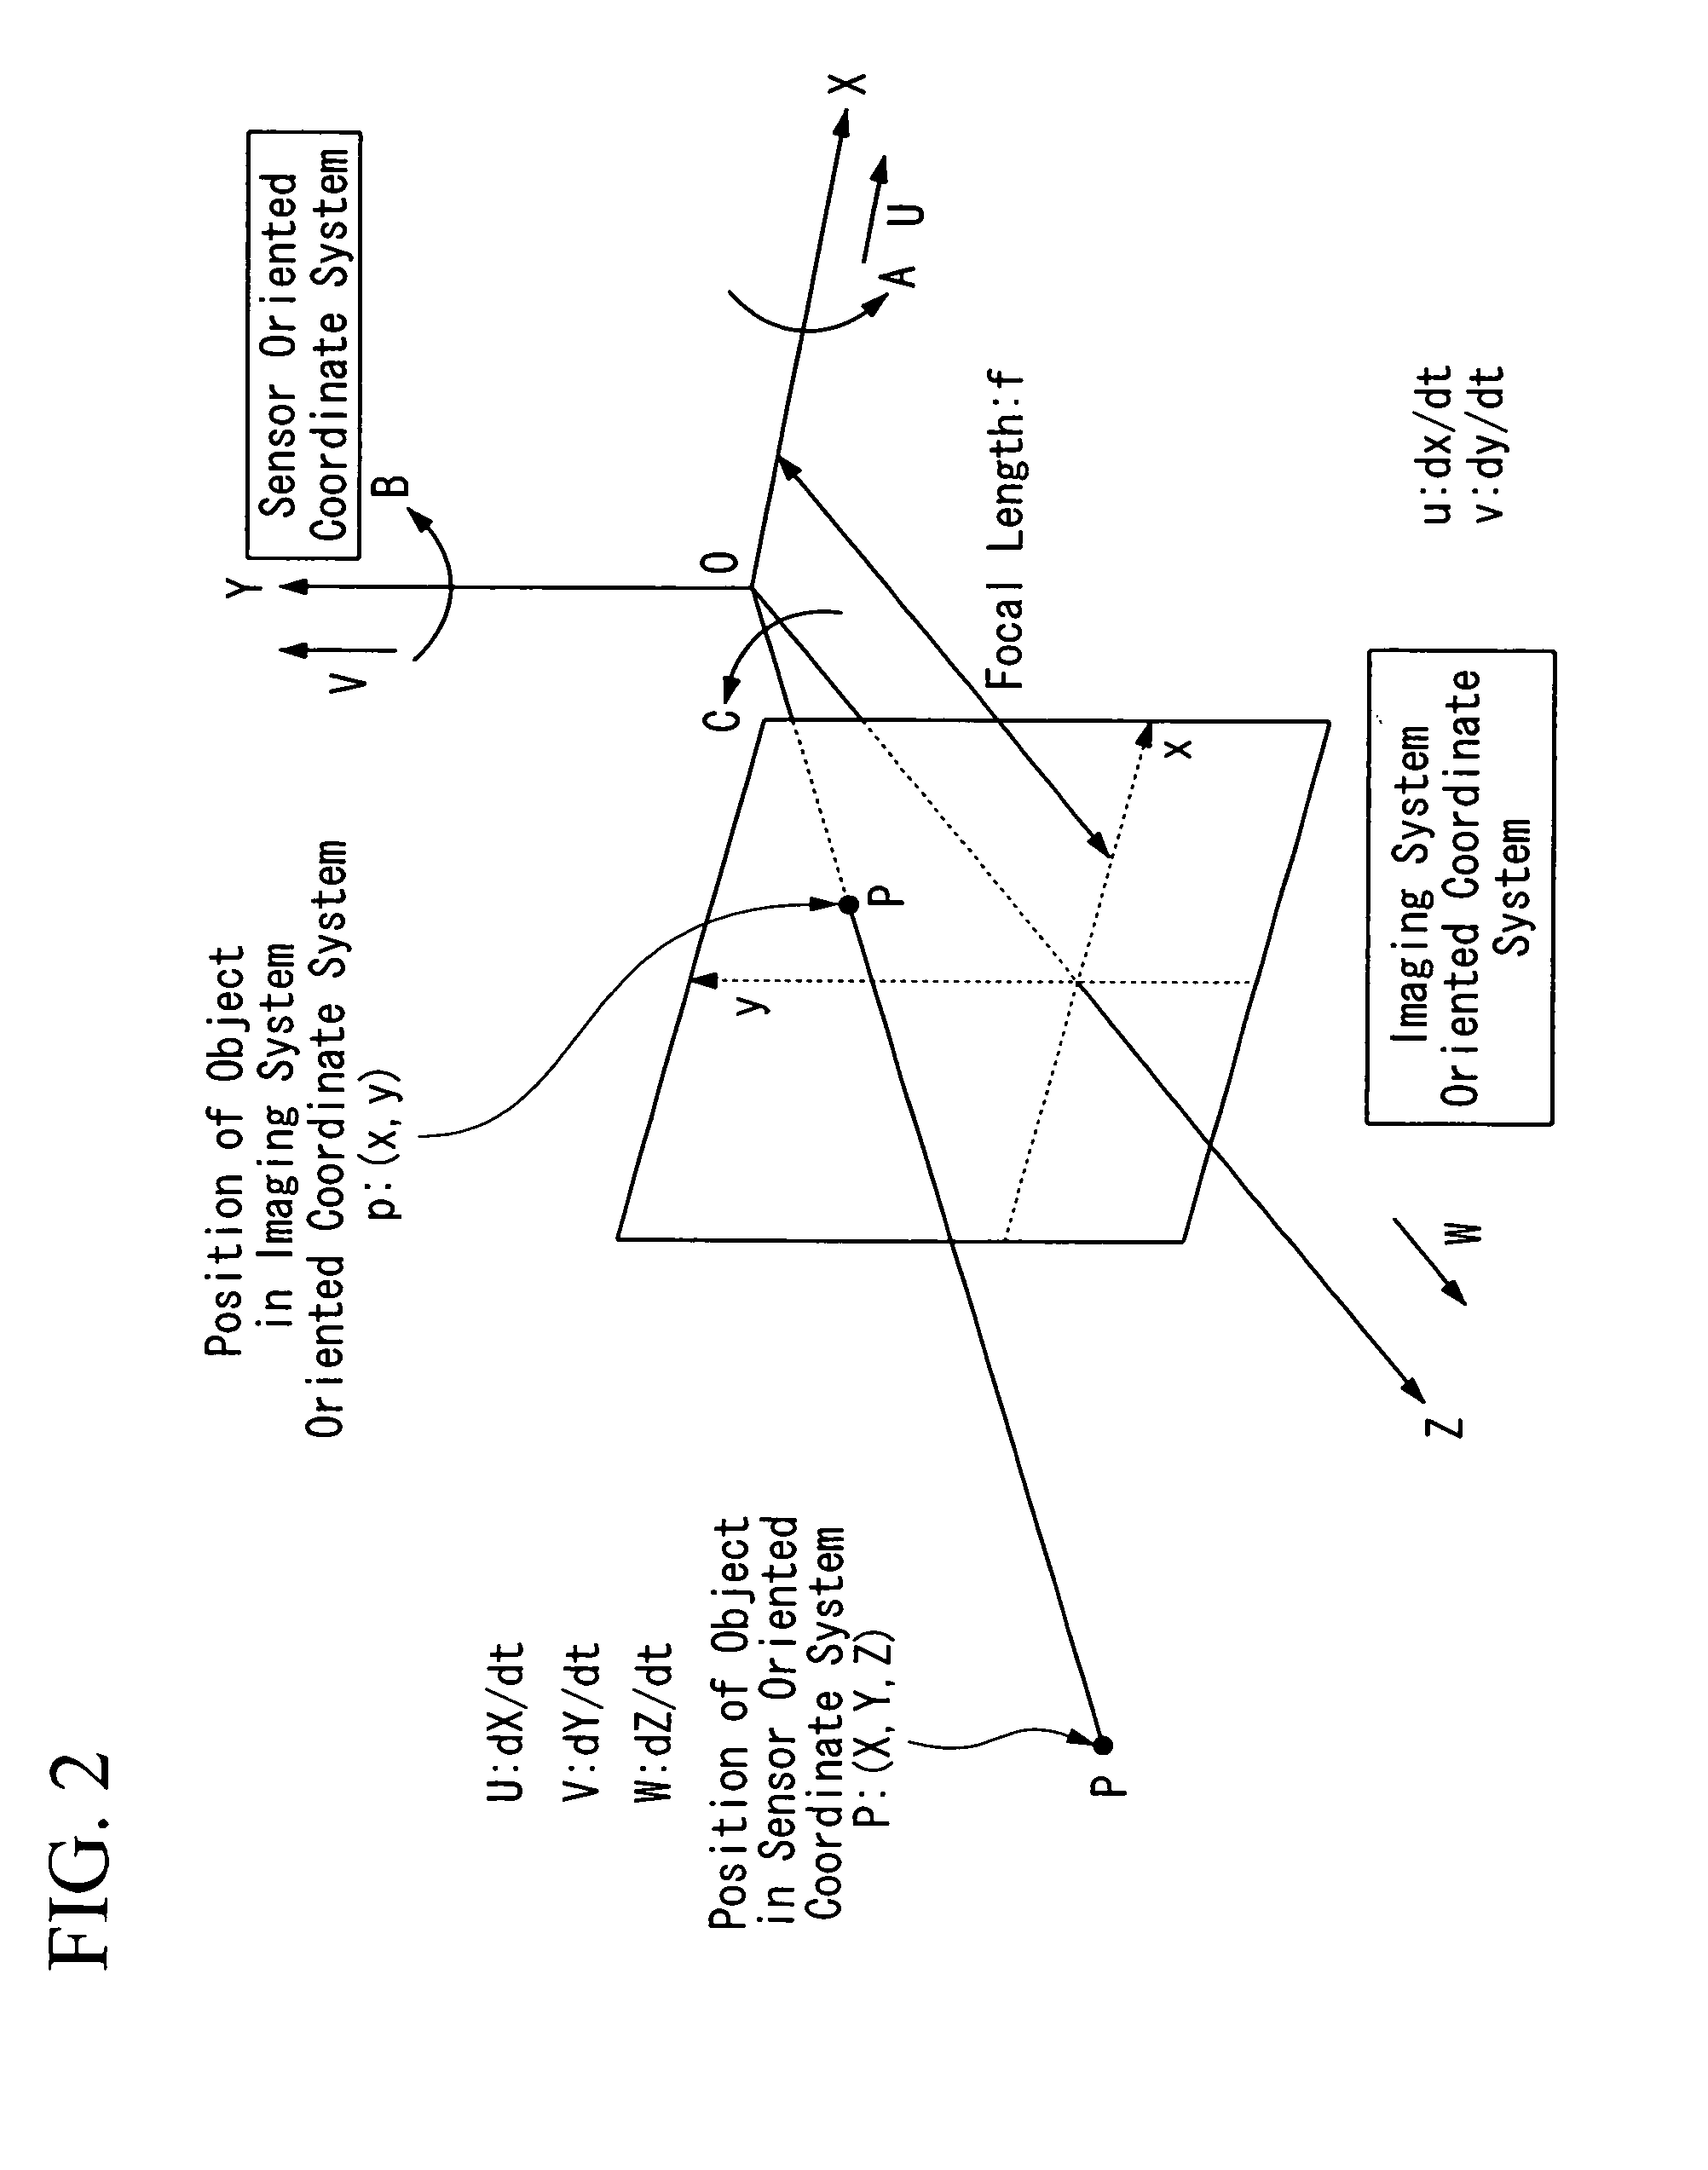 Time-to-contact estimation device and method for estimating time to contact